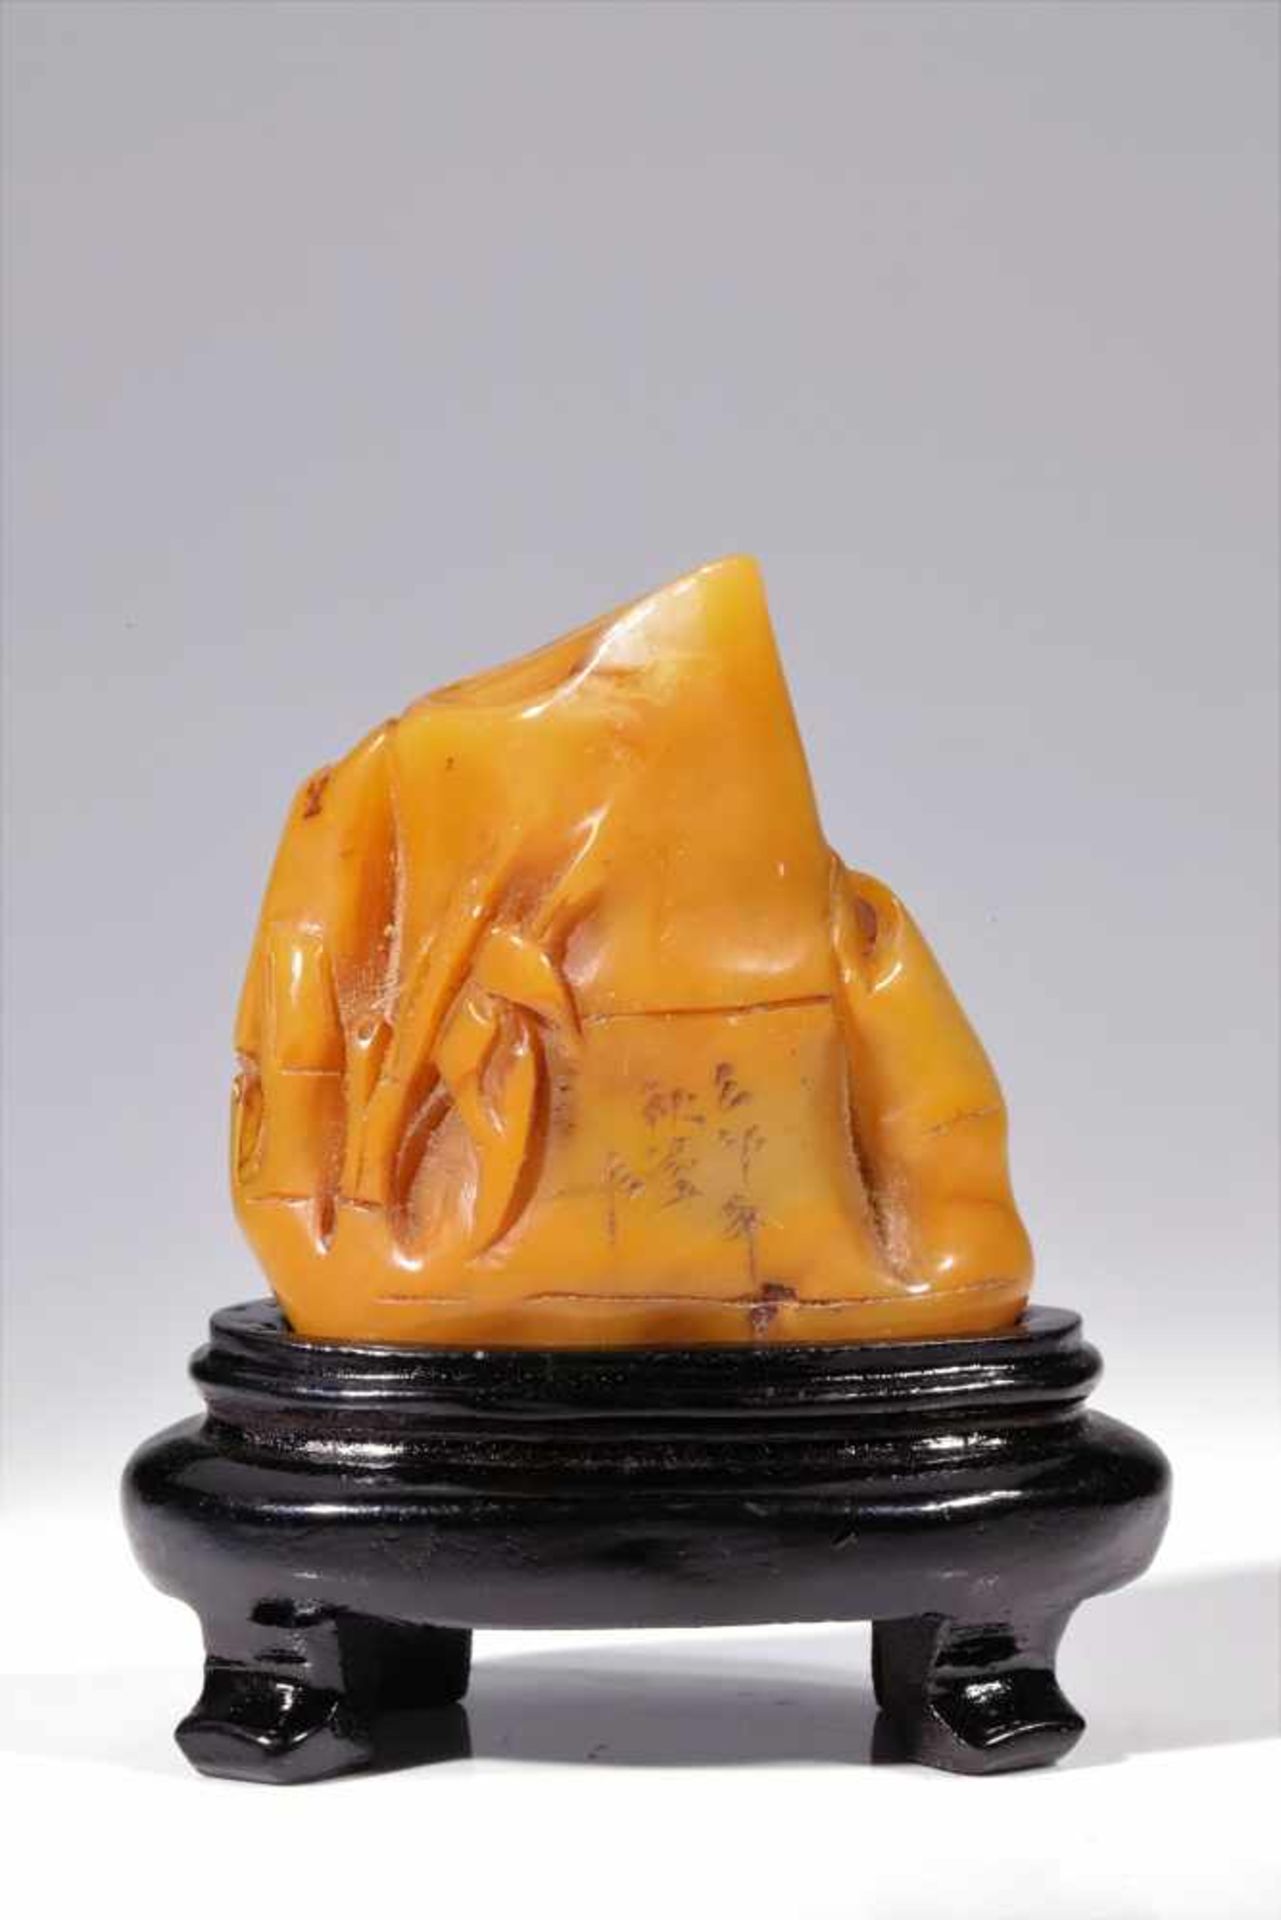 YELLOW SEALsteatite,China, 19th century, Qing Dynasty,Size: 6 cmSeal carved in the shape of a big